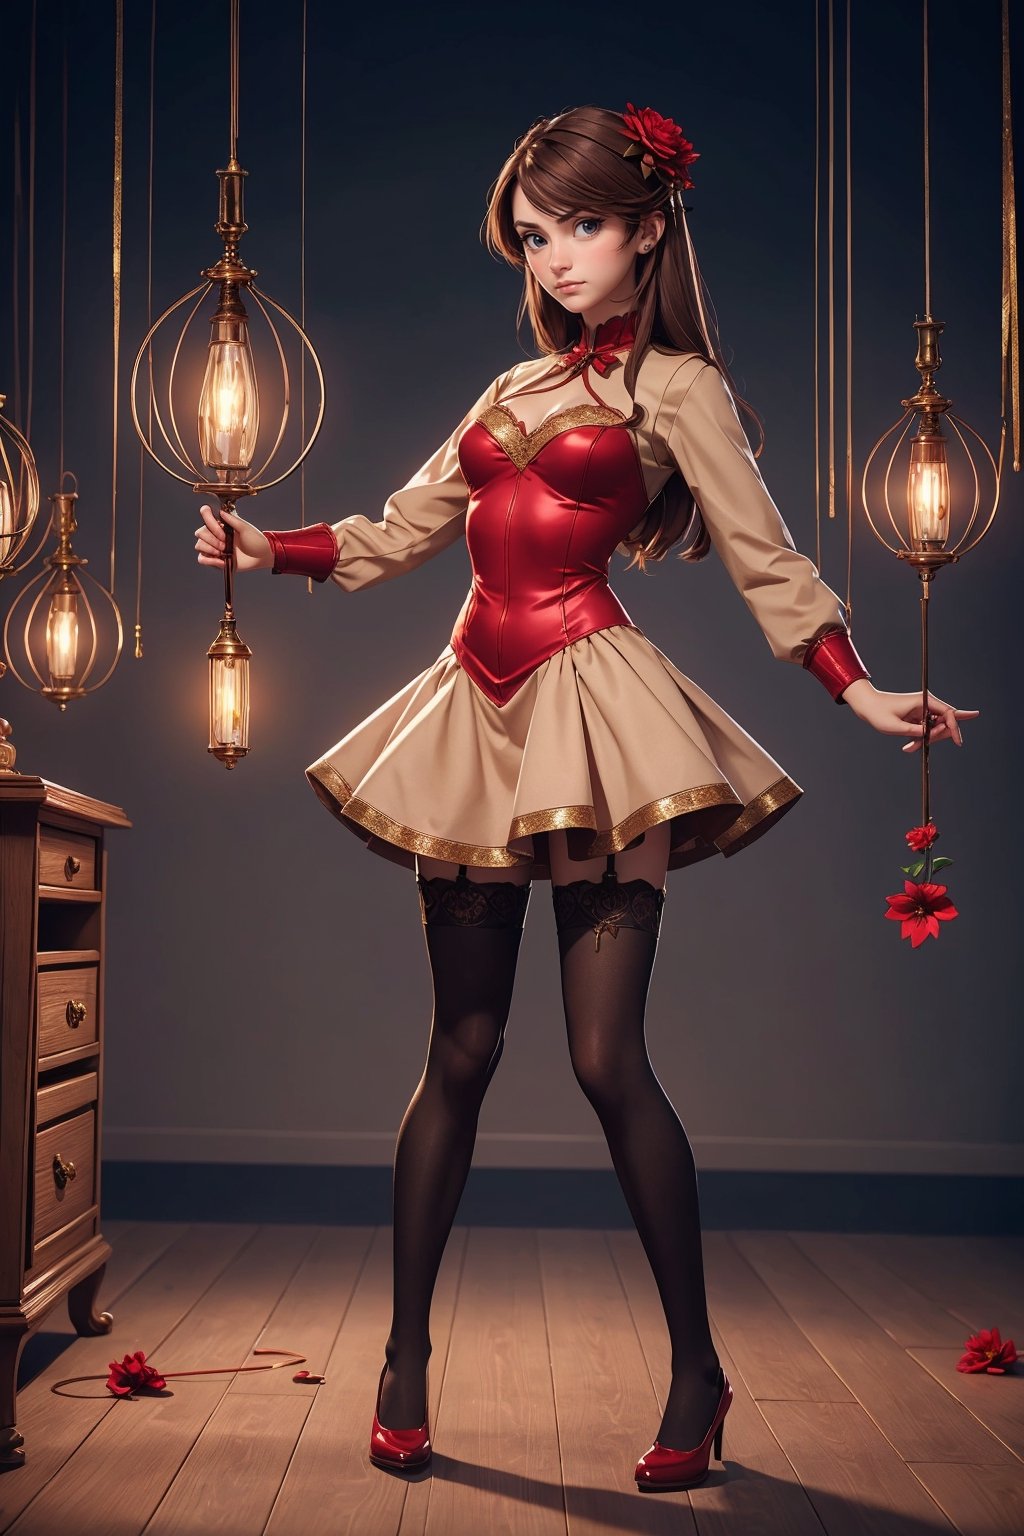  beautiful, good hands, full body, good body, 18 year old girl body, sexy pose, arcane style, clothes with accessories, denier tights in beige, stockings_colorbeige, brown hair, straight hair, fair skin, light eyes, red flower in the girl's hair,,glitter,shiny,Marionette,
Red dress